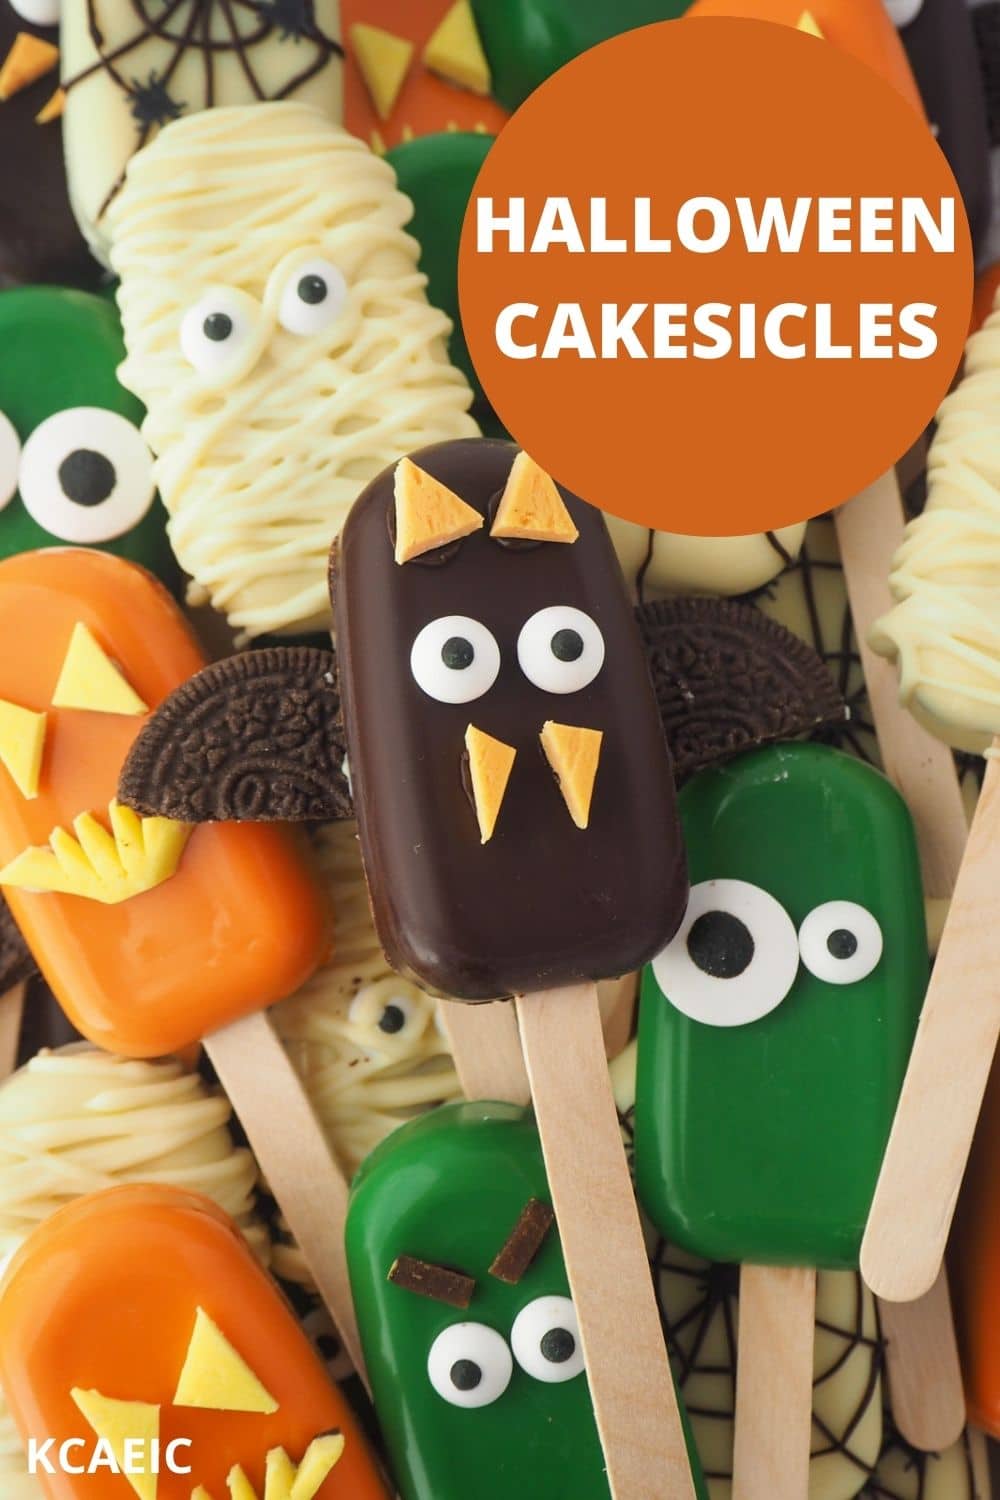 Pile of Mummy, bat, monster, jack-o-lantern and spider cakesicles with text overlay, Halloween cakesicles, KCAEIC.